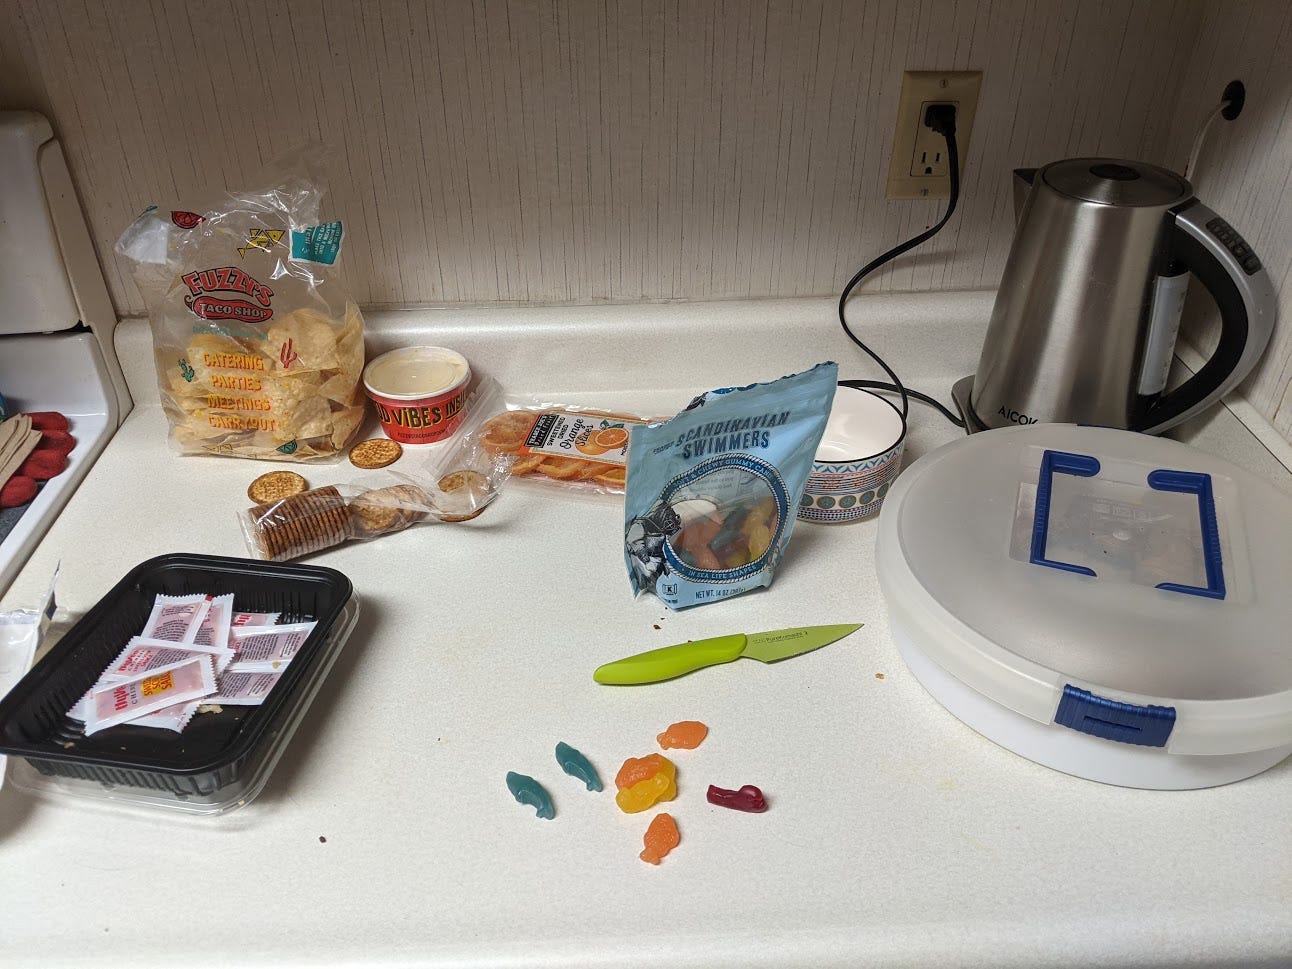 Various left-over snack items look a little bit squalid on the countertop; there is a small, green paring knife looking vaguely ominous next to several scattered Trader Joe's brand Scandinavian Swimmers.